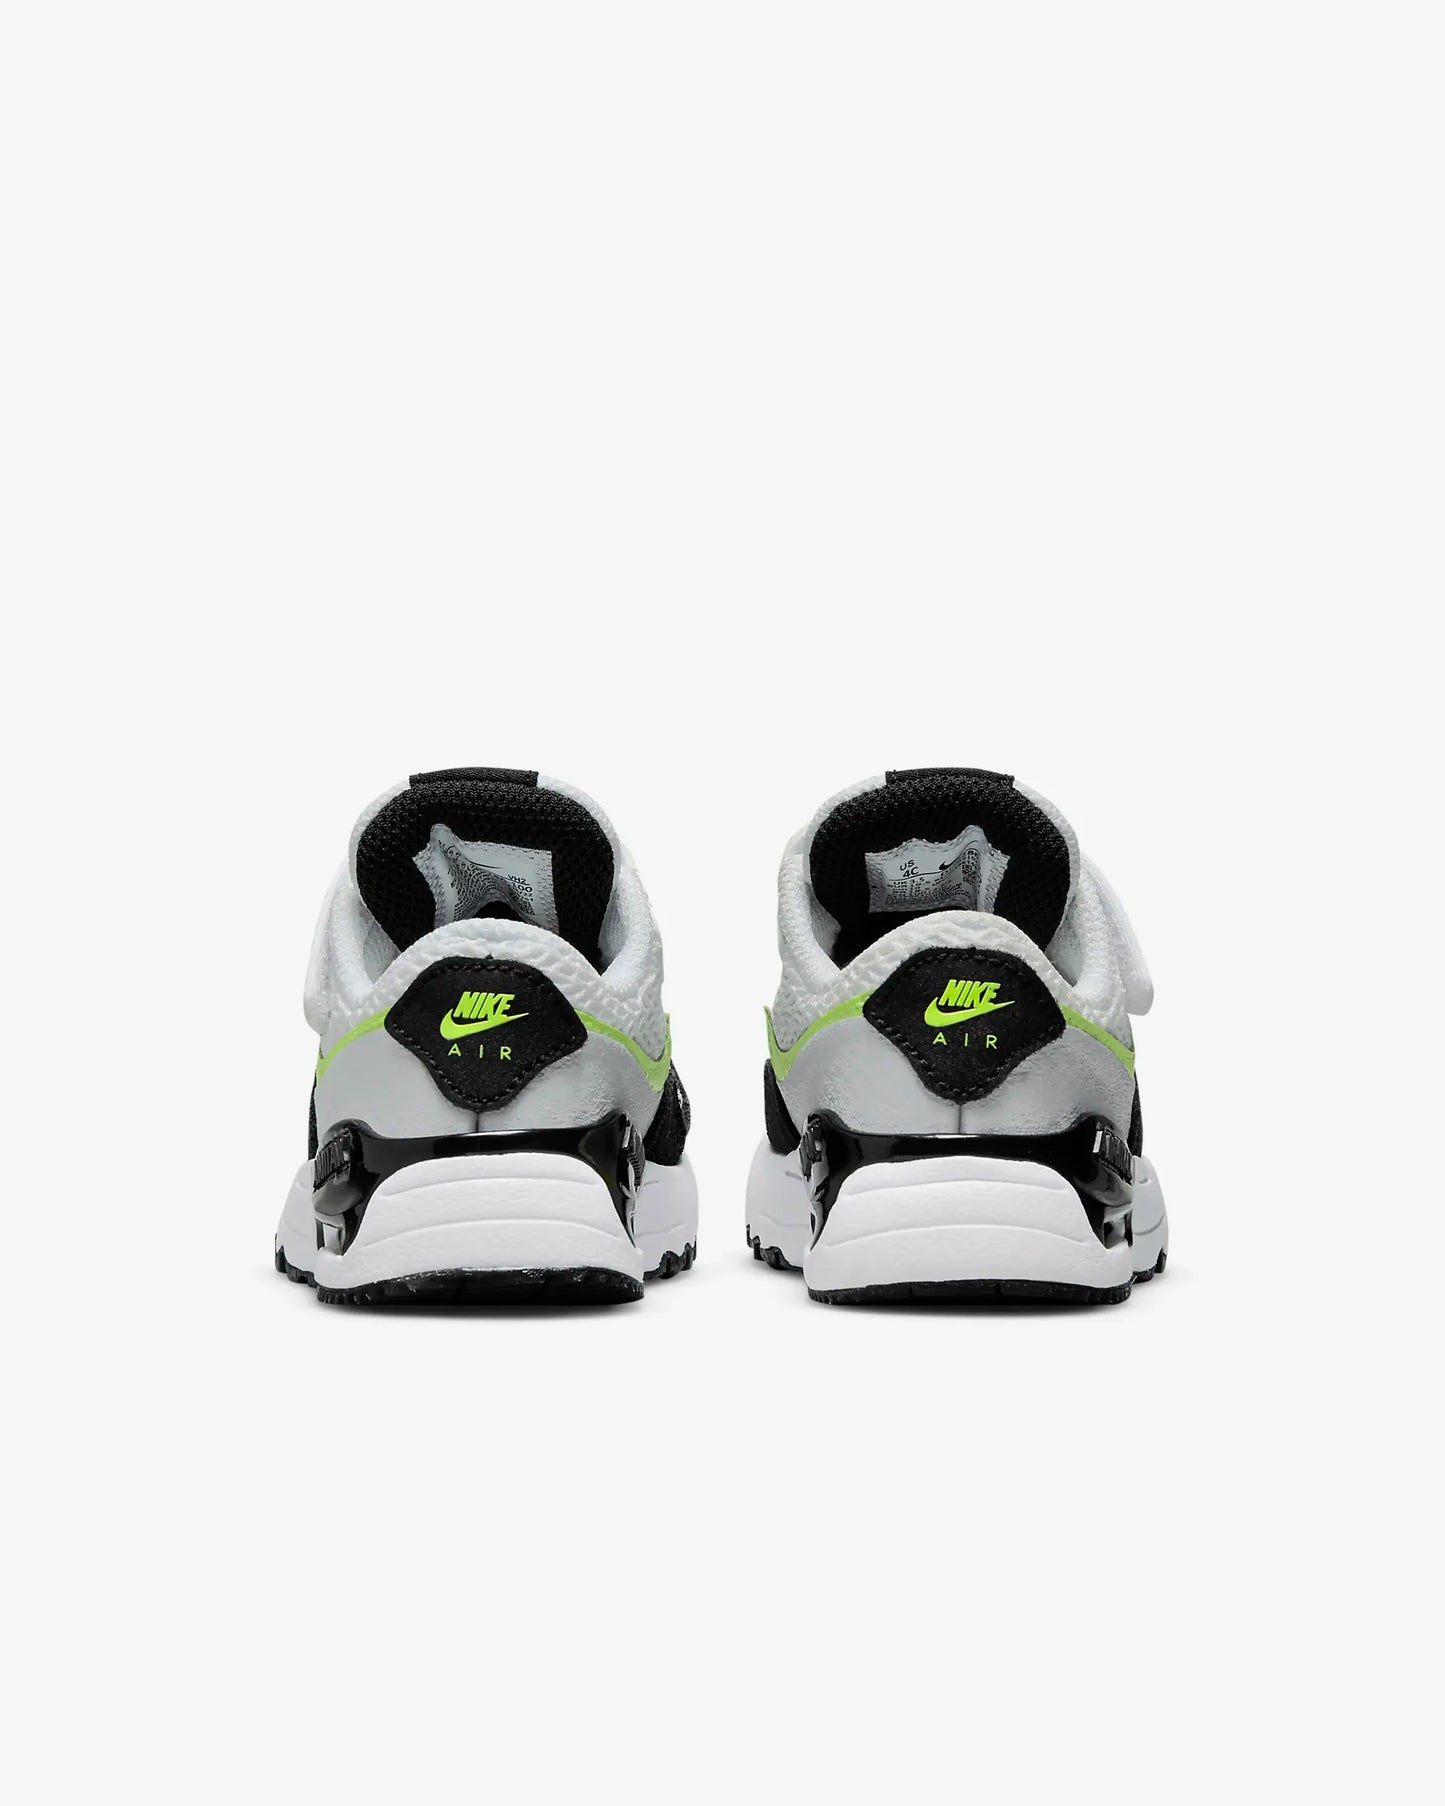 Nike Air Max SYSTM Baby/Toddler Shoes - (DQ0286 100) - AS - R1L9